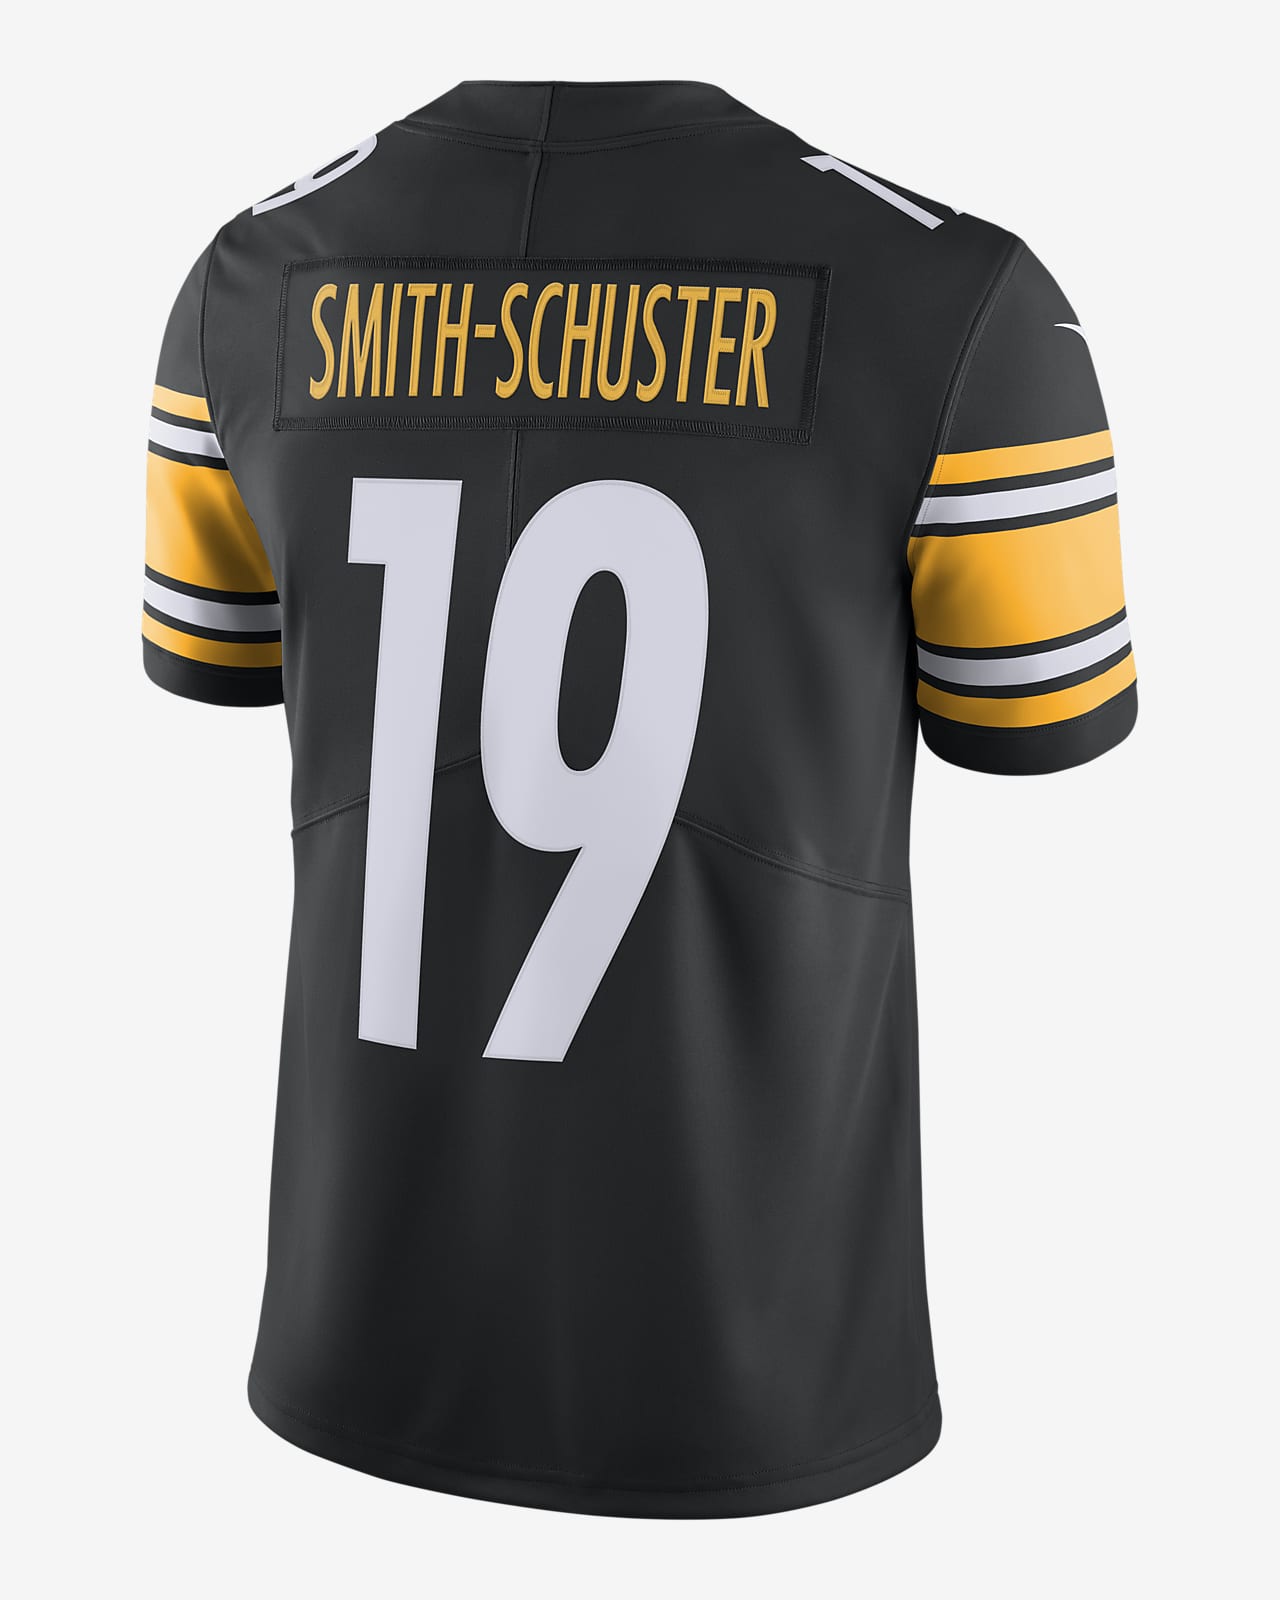 juju smith schuster authentic jersey